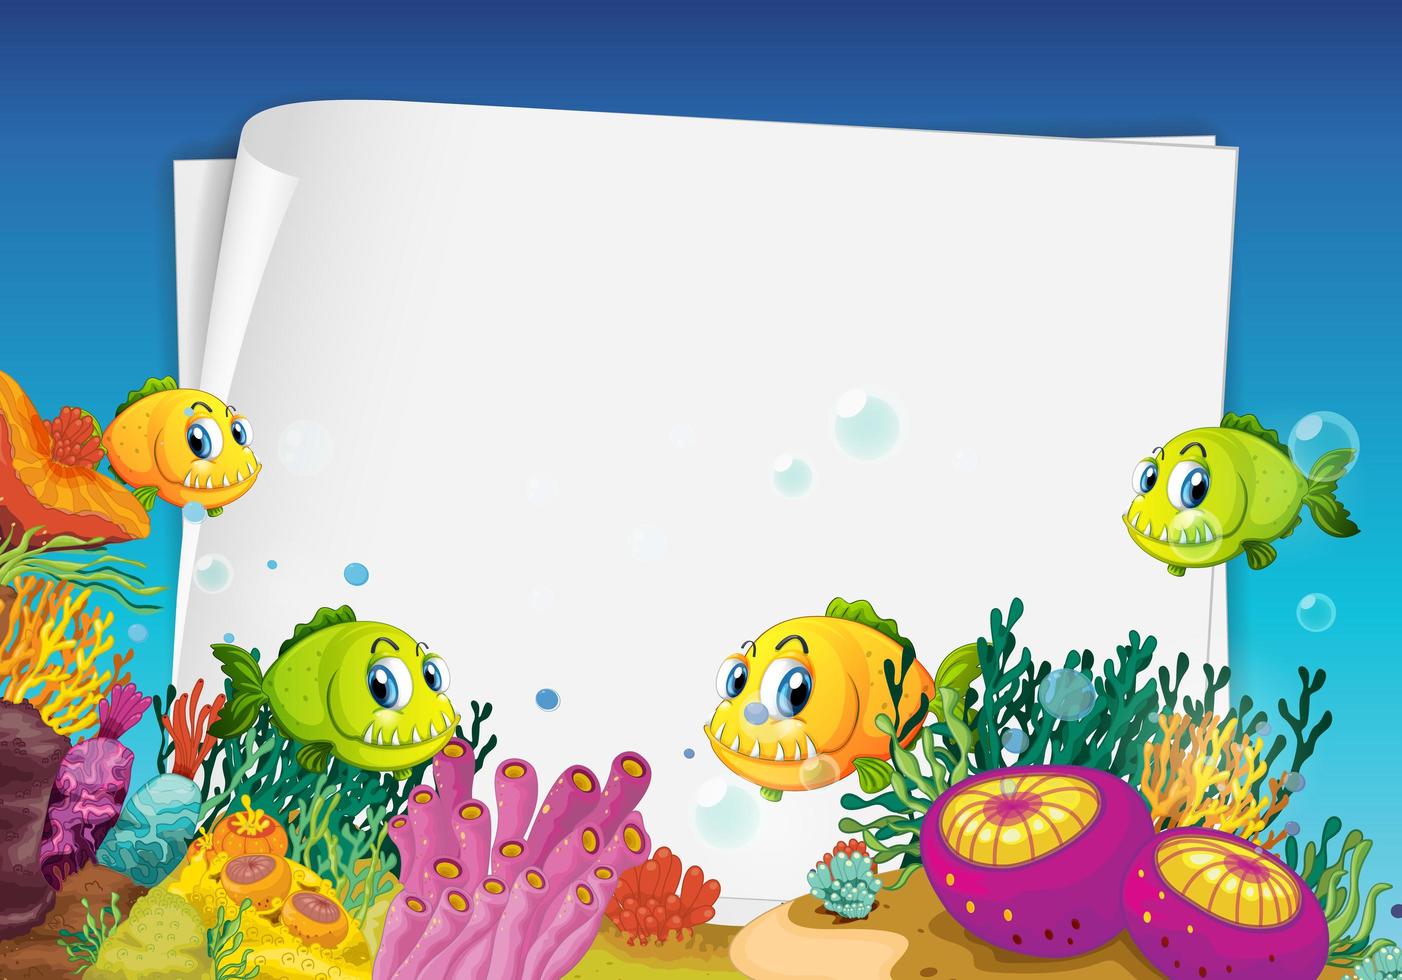 Blank paper banner with exotic fish and undersea nature elements on the underwater background vector